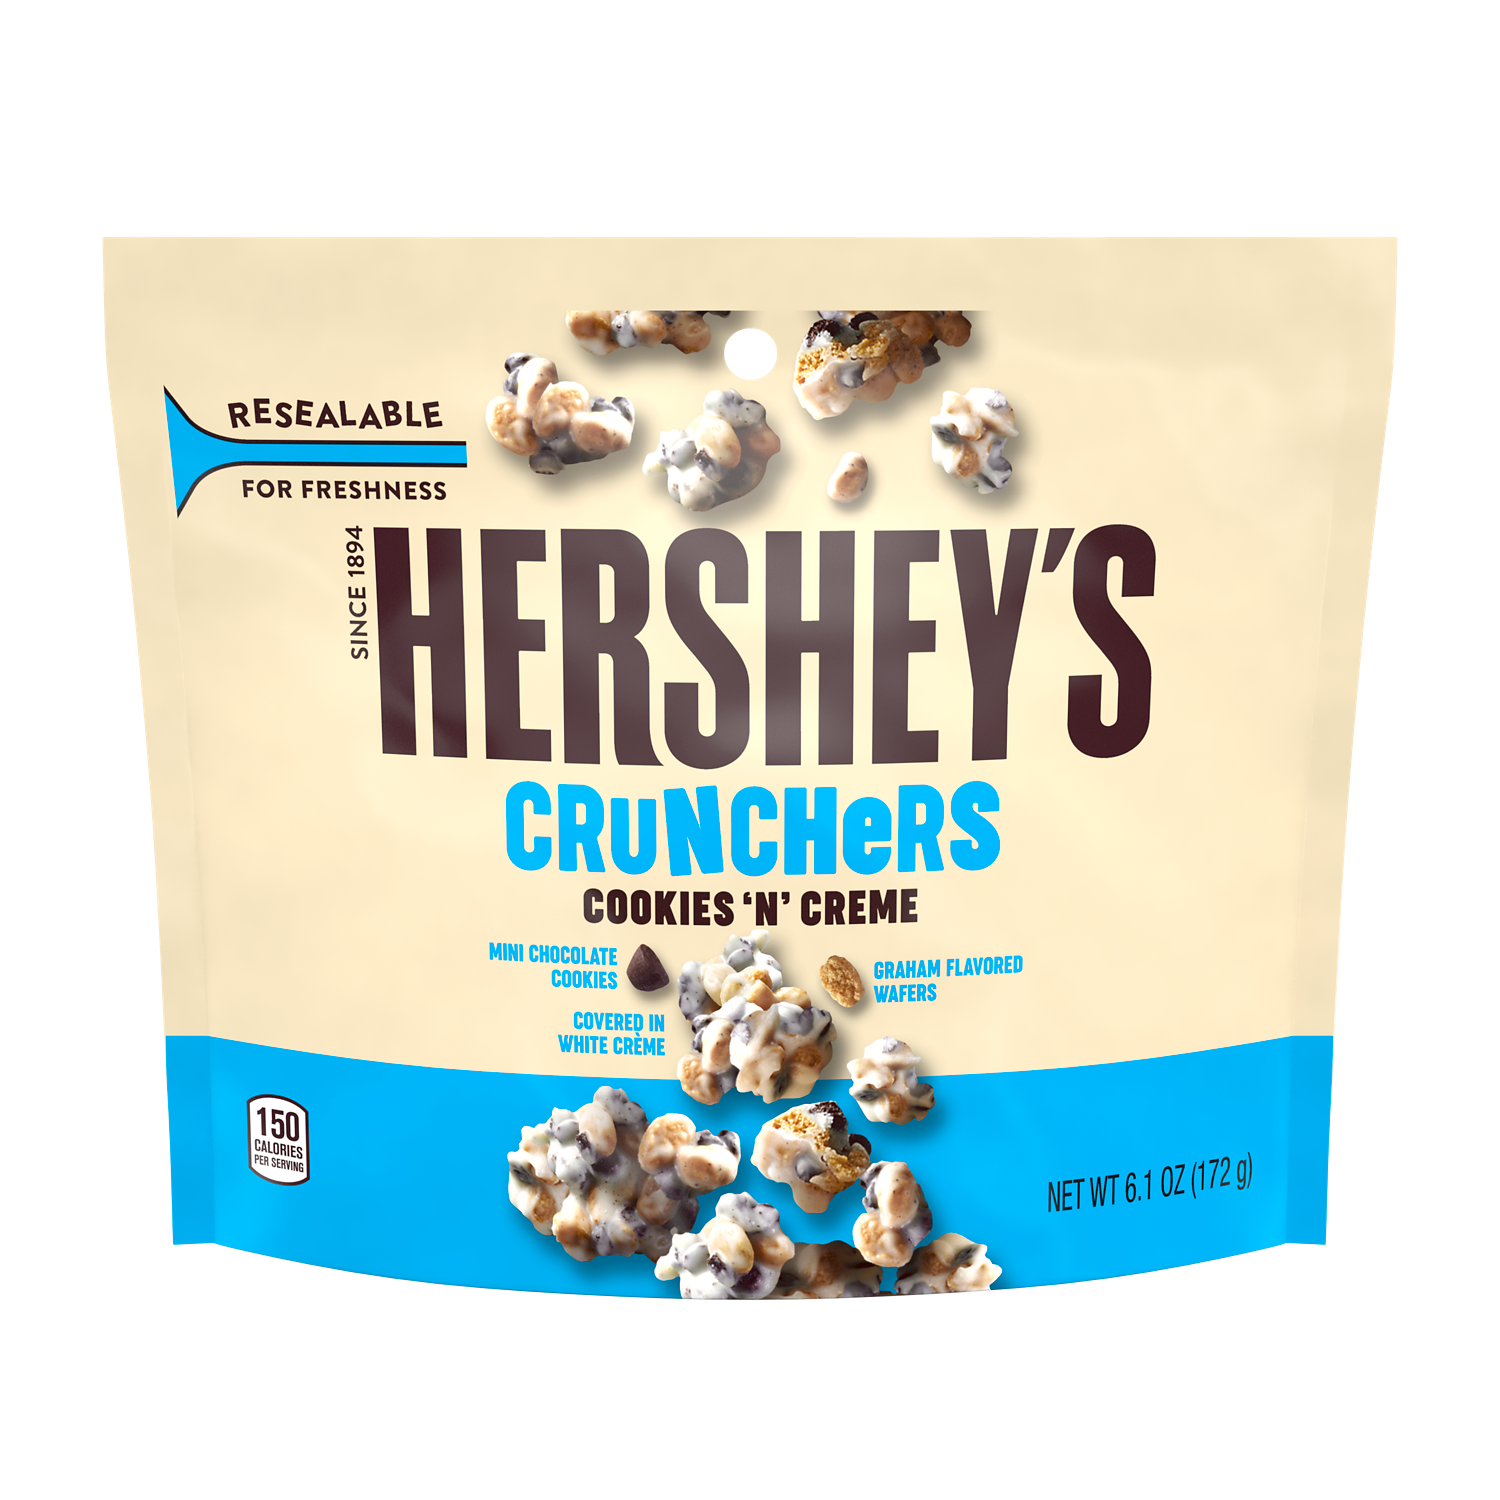 HERSHEY'S CRUNCHERS COOKIES 'N' CREME Candy, 6.1 oz bag - Front of Package